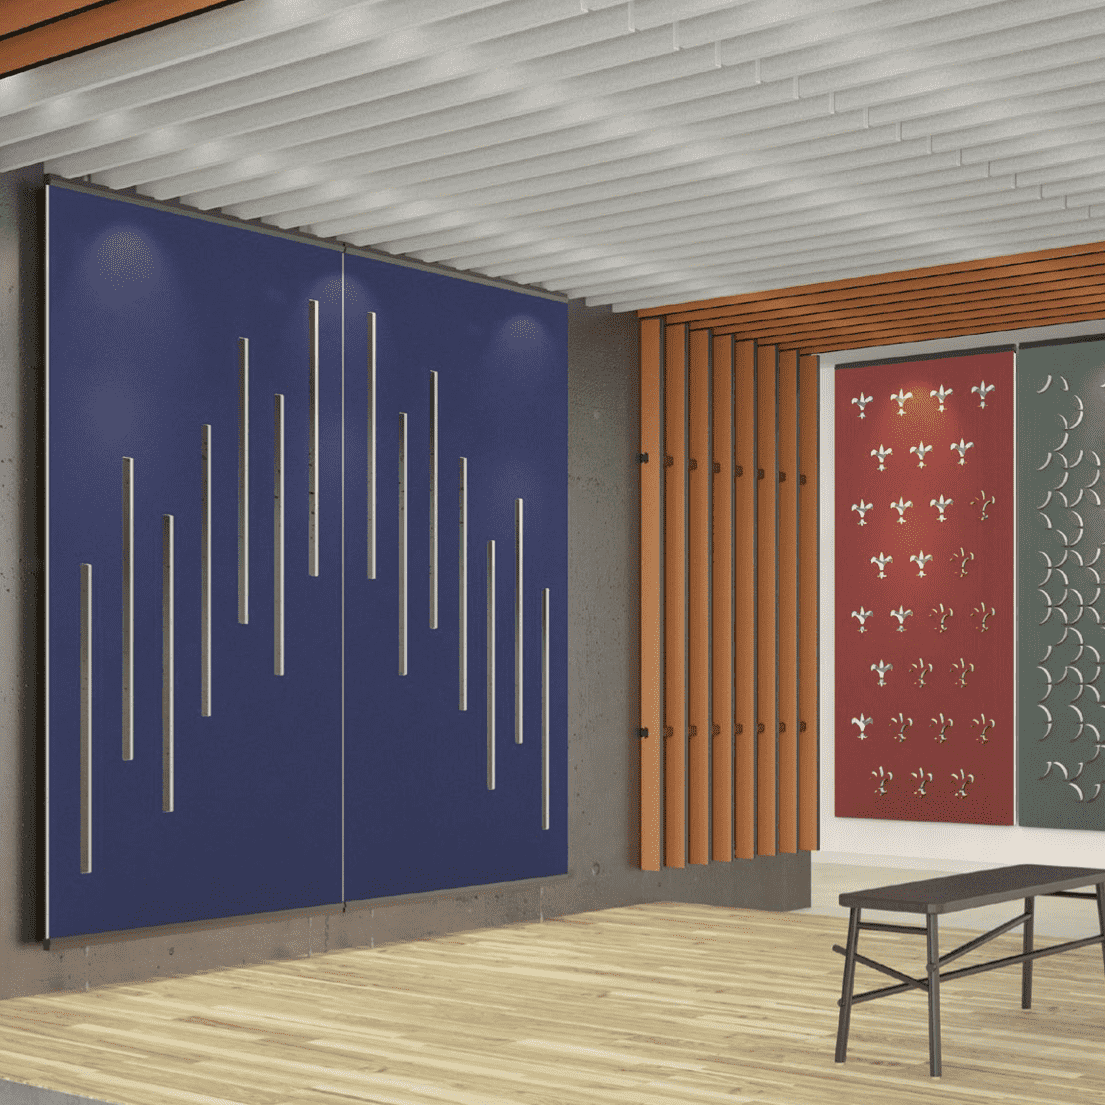 Image of various acoustic panels attached to walls in a room. Panels from Acoustek's Pastorale collection.